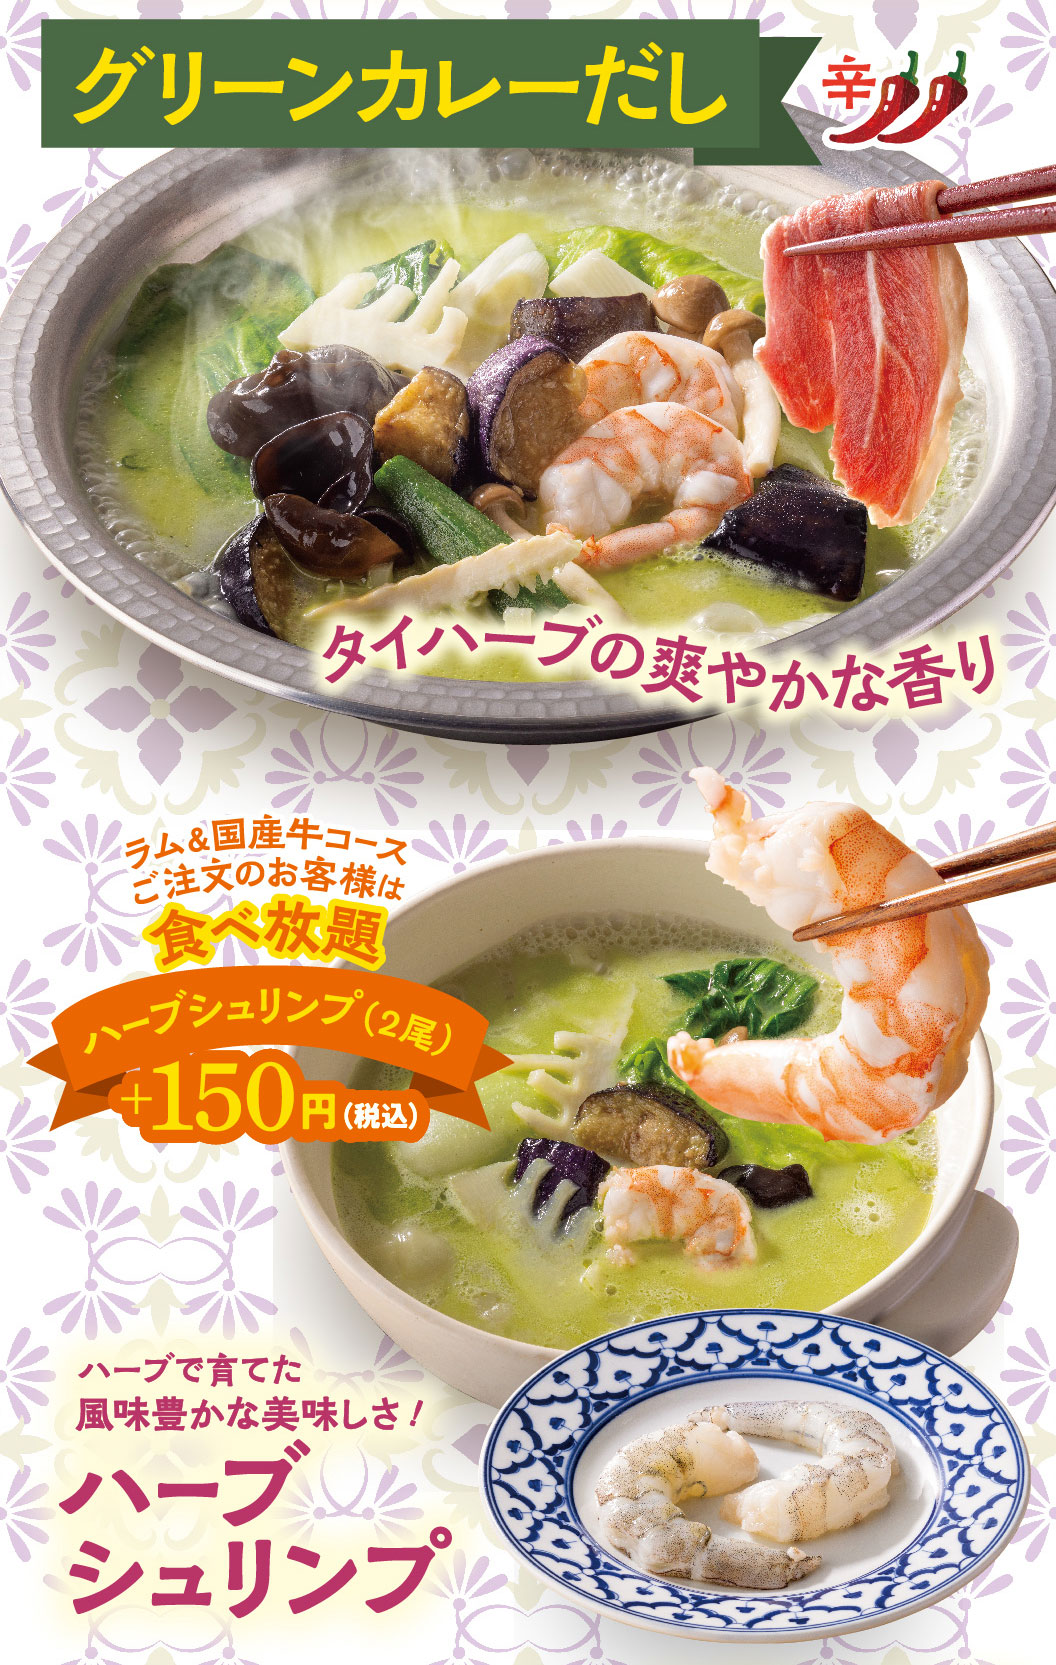 Green curry soup